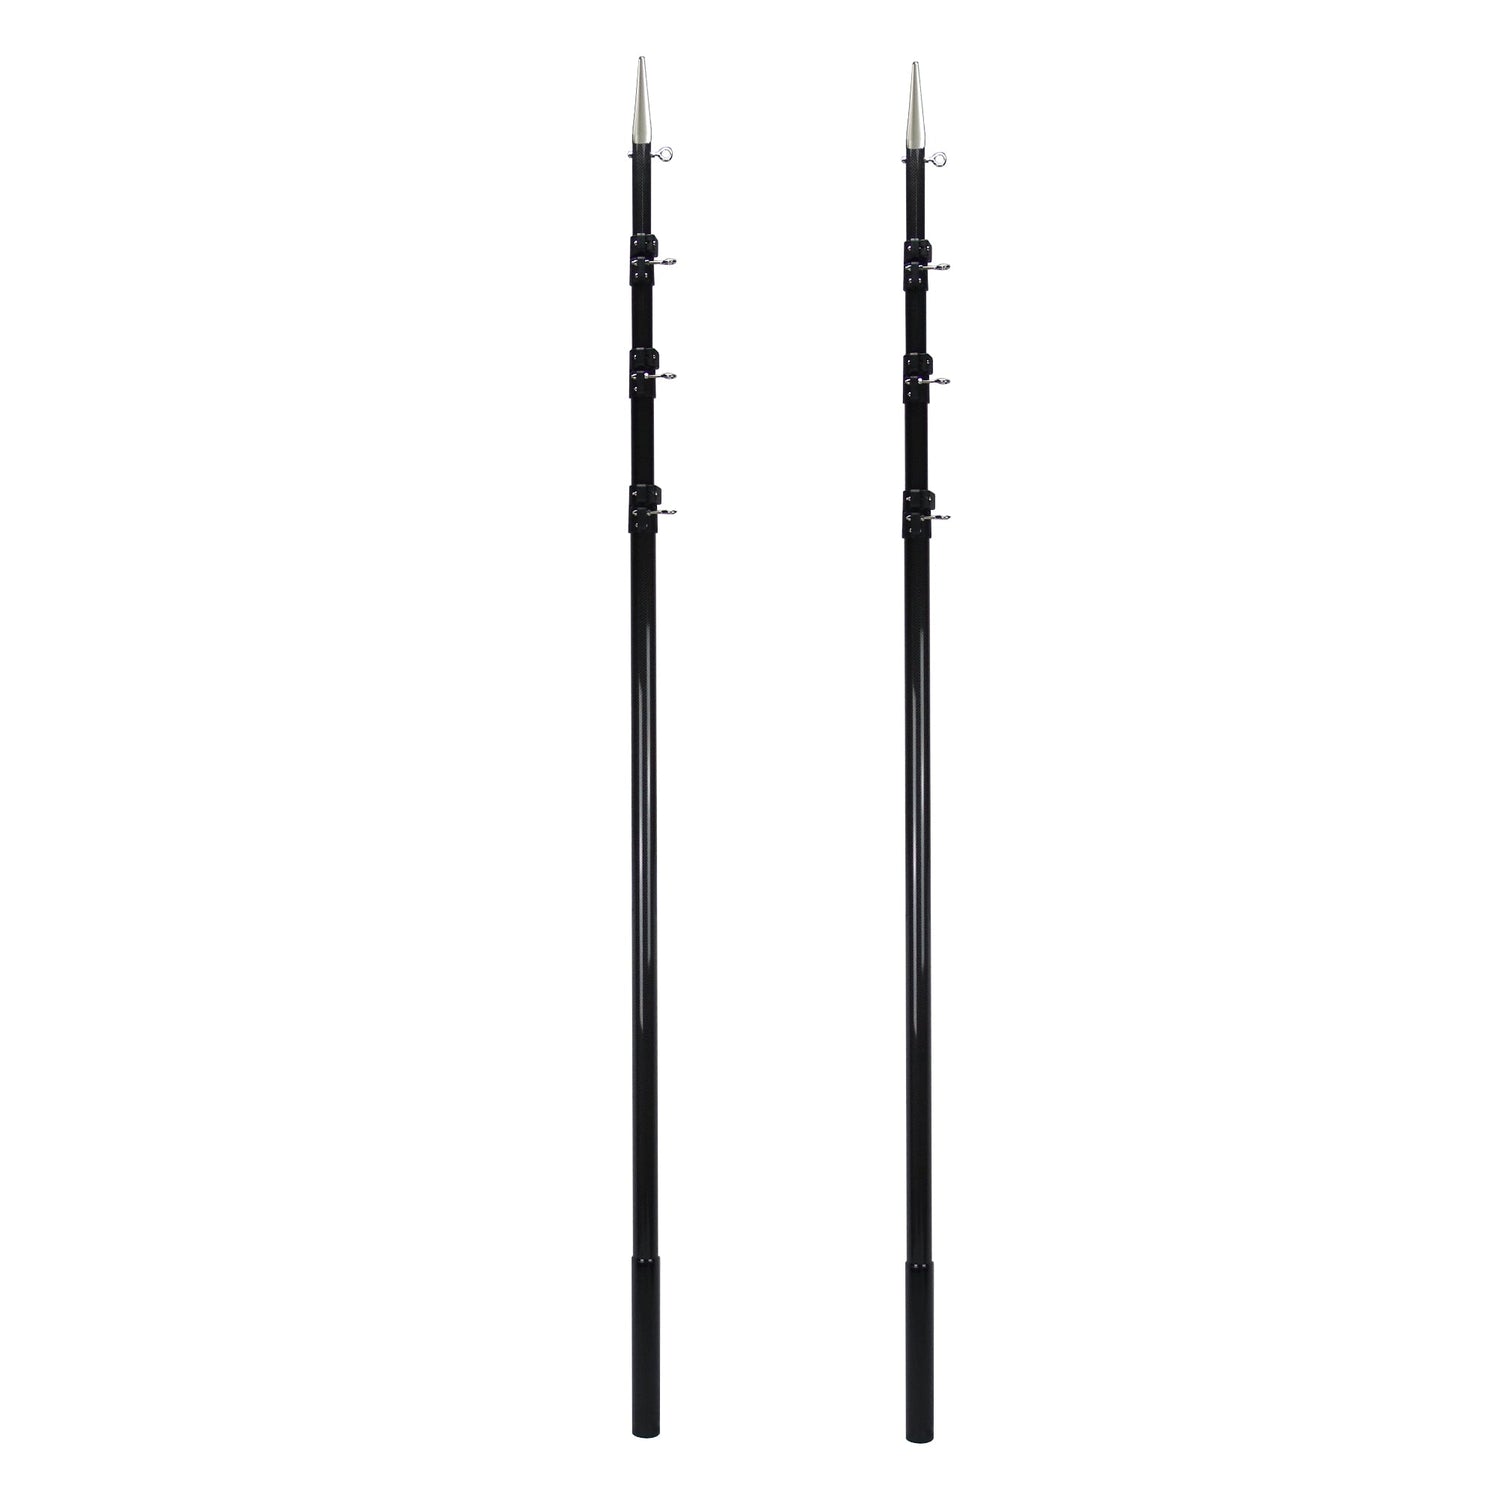 Reelax T-Topper with 4.5m Telescopic 3K Carbon Poles & Rigging Complete Kit-Outriggers & Accessories-Reelax-Fishing Station